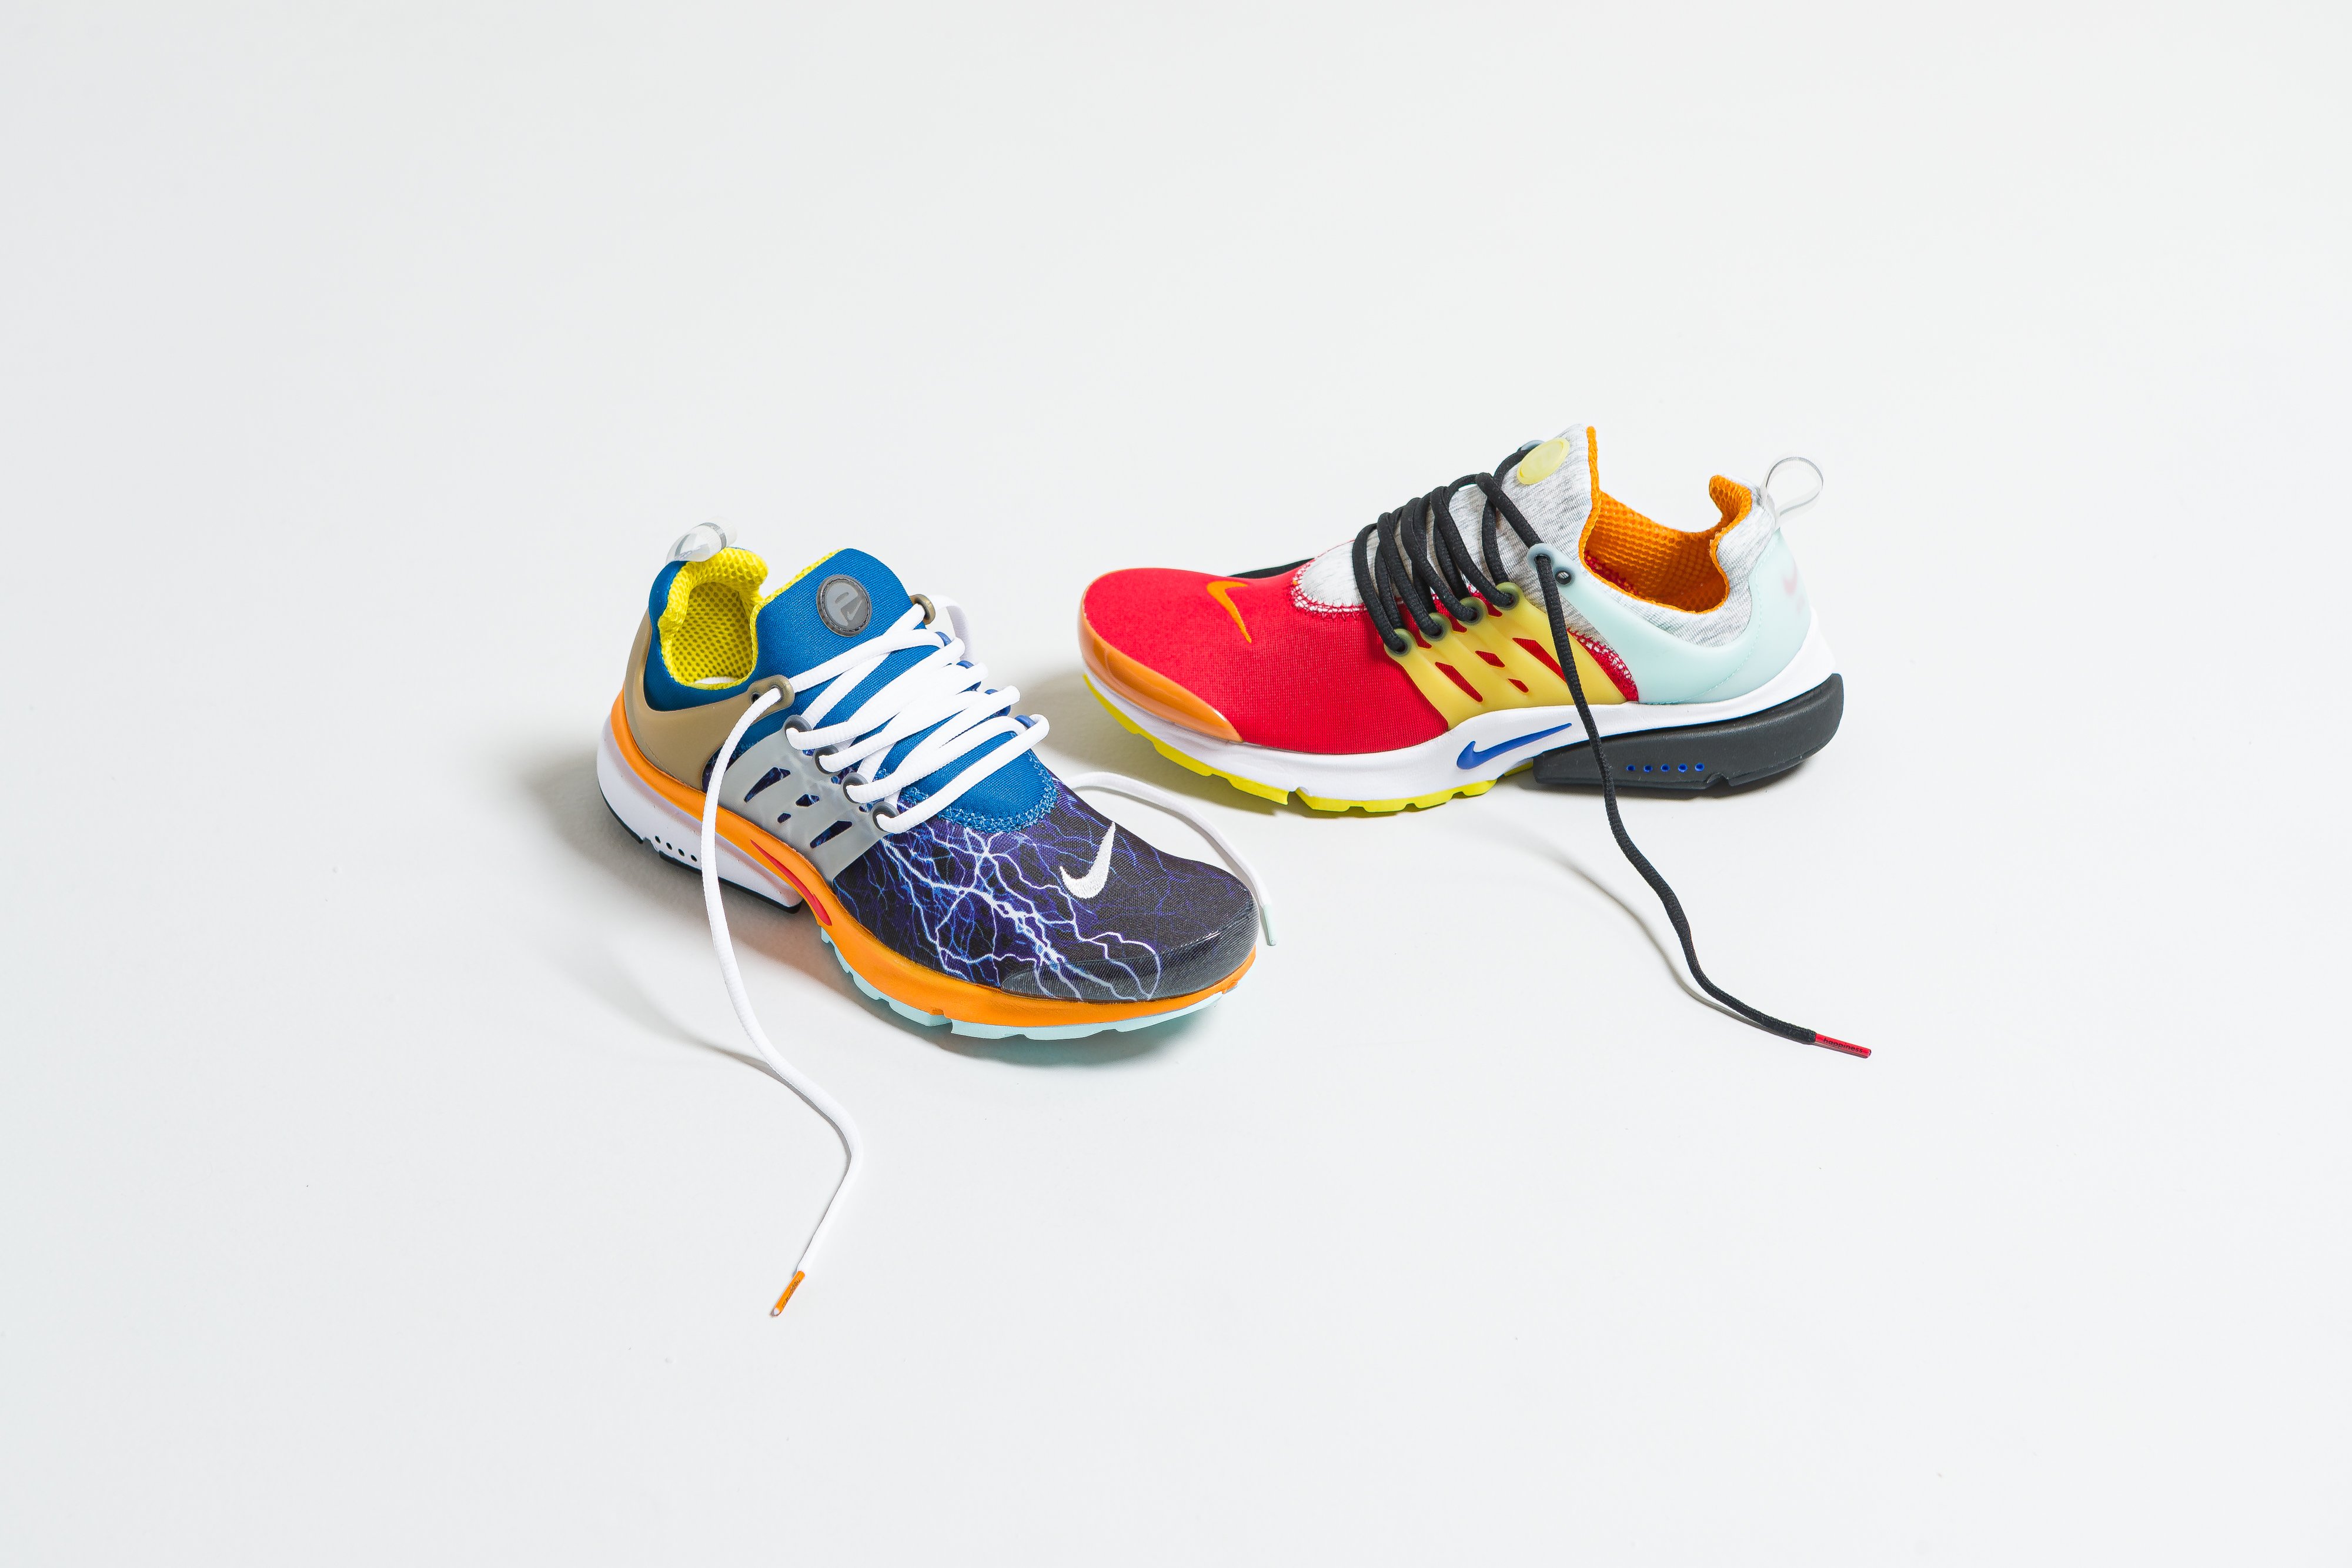 Up There Launches - Nike Air Presto 'What The' - Multi-Colour/Multi-Colour - DM9554-900